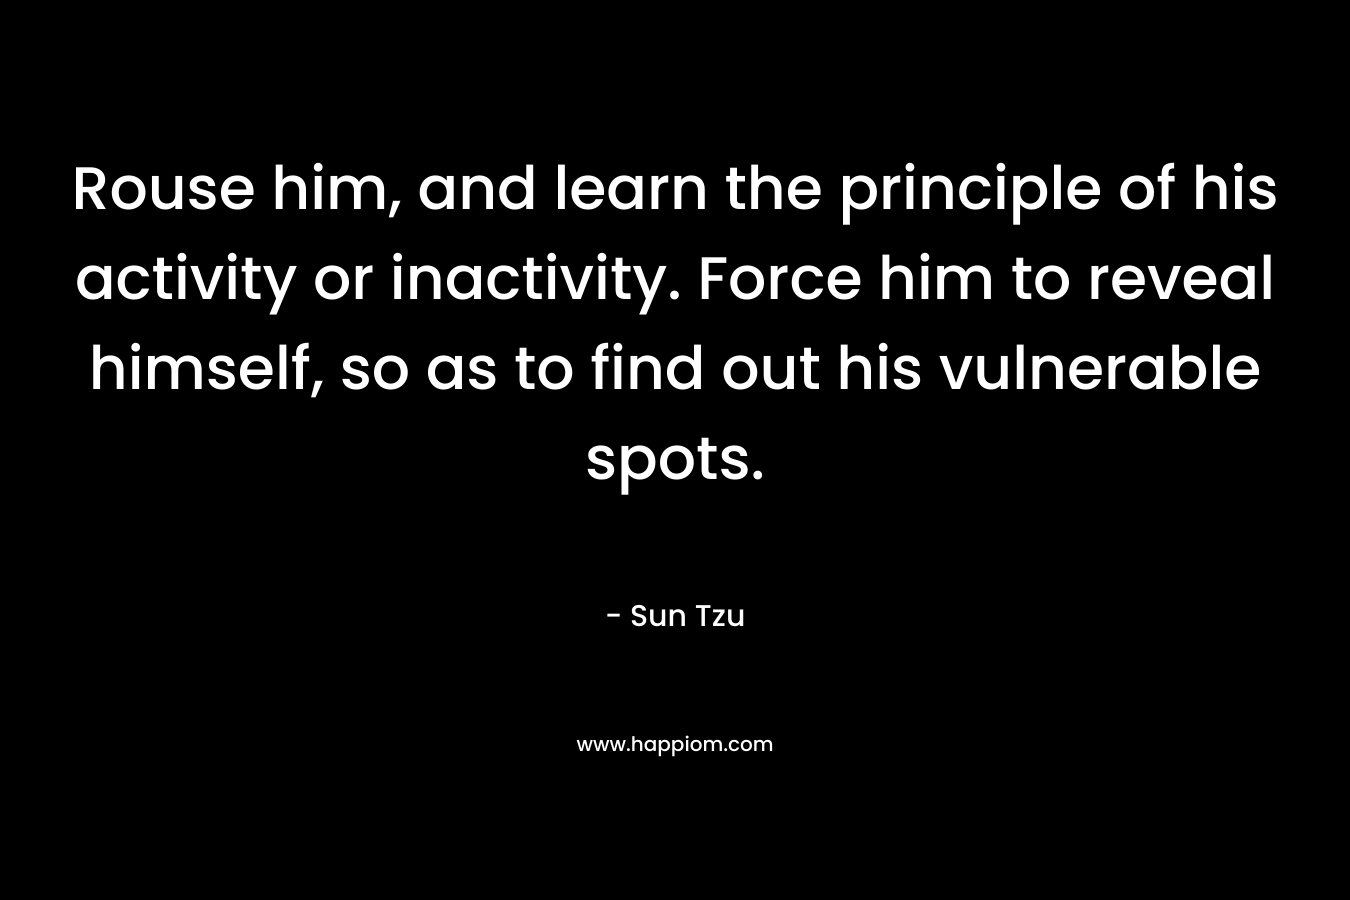 Rouse him, and learn the principle of his activity or inactivity. Force him to reveal himself, so as to find out his vulnerable spots.